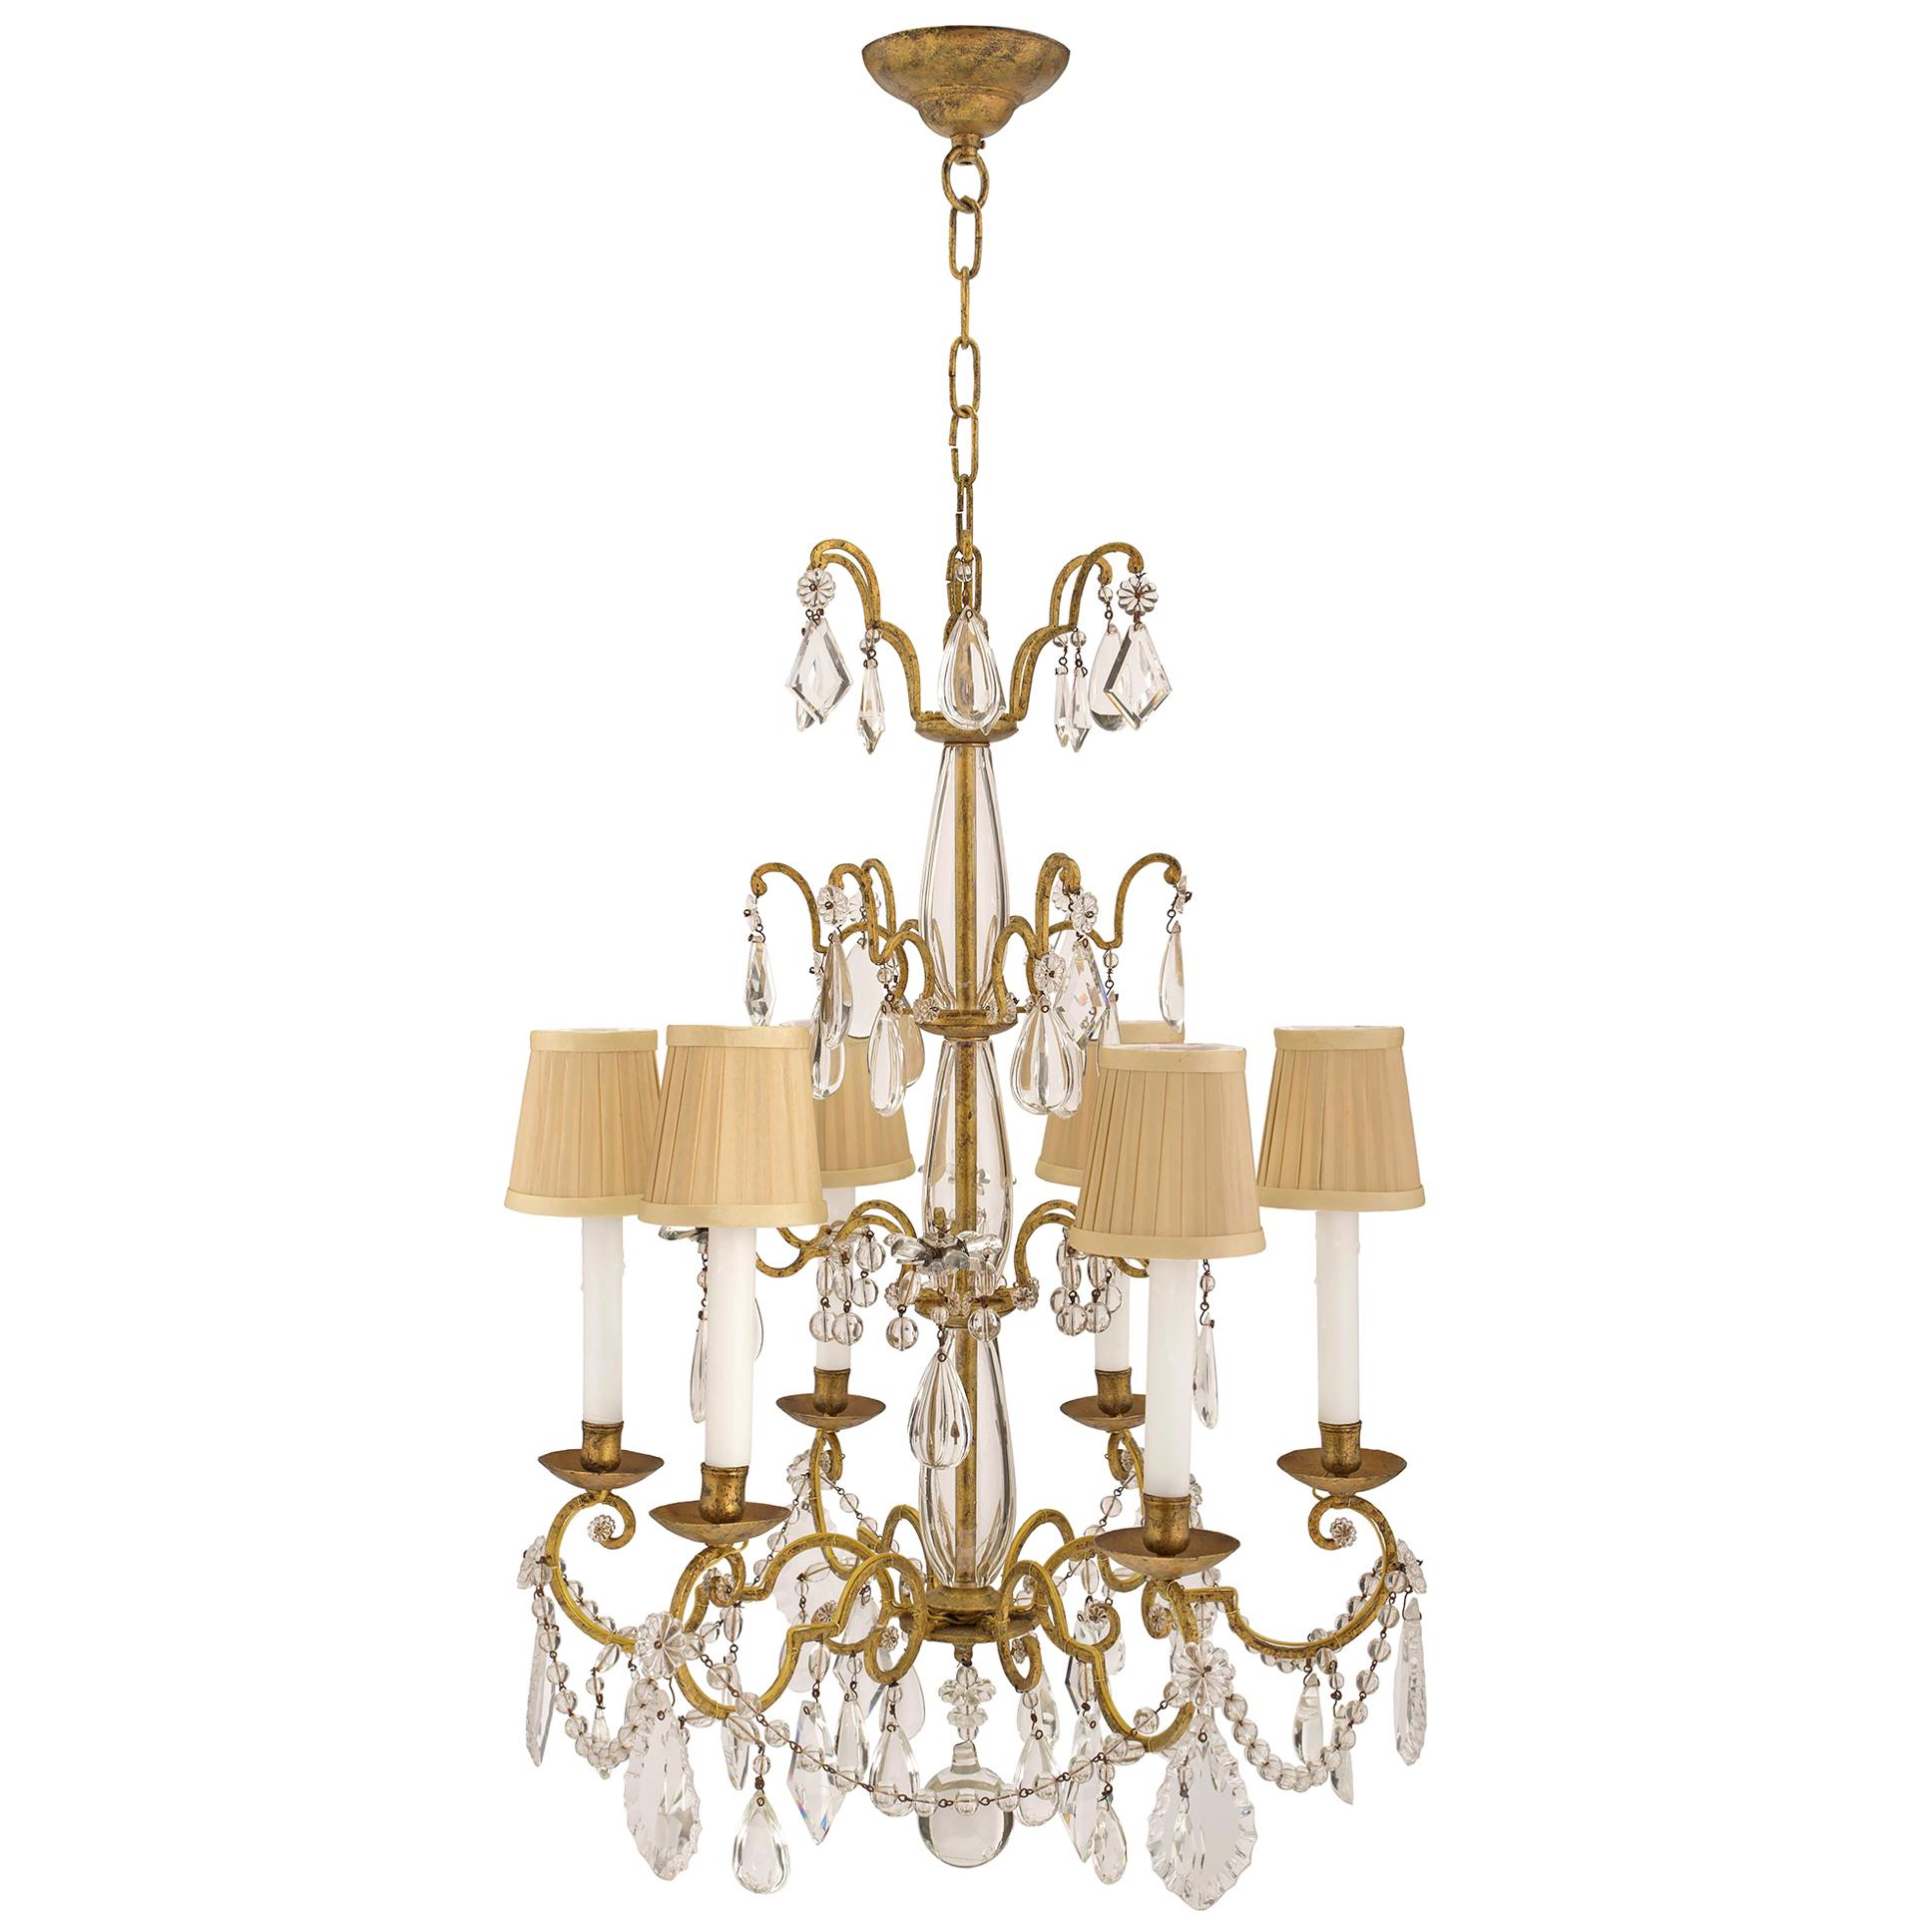 Italian 19th Century Louis XV Style Gilt Iron Crystal and Glass Chandelier